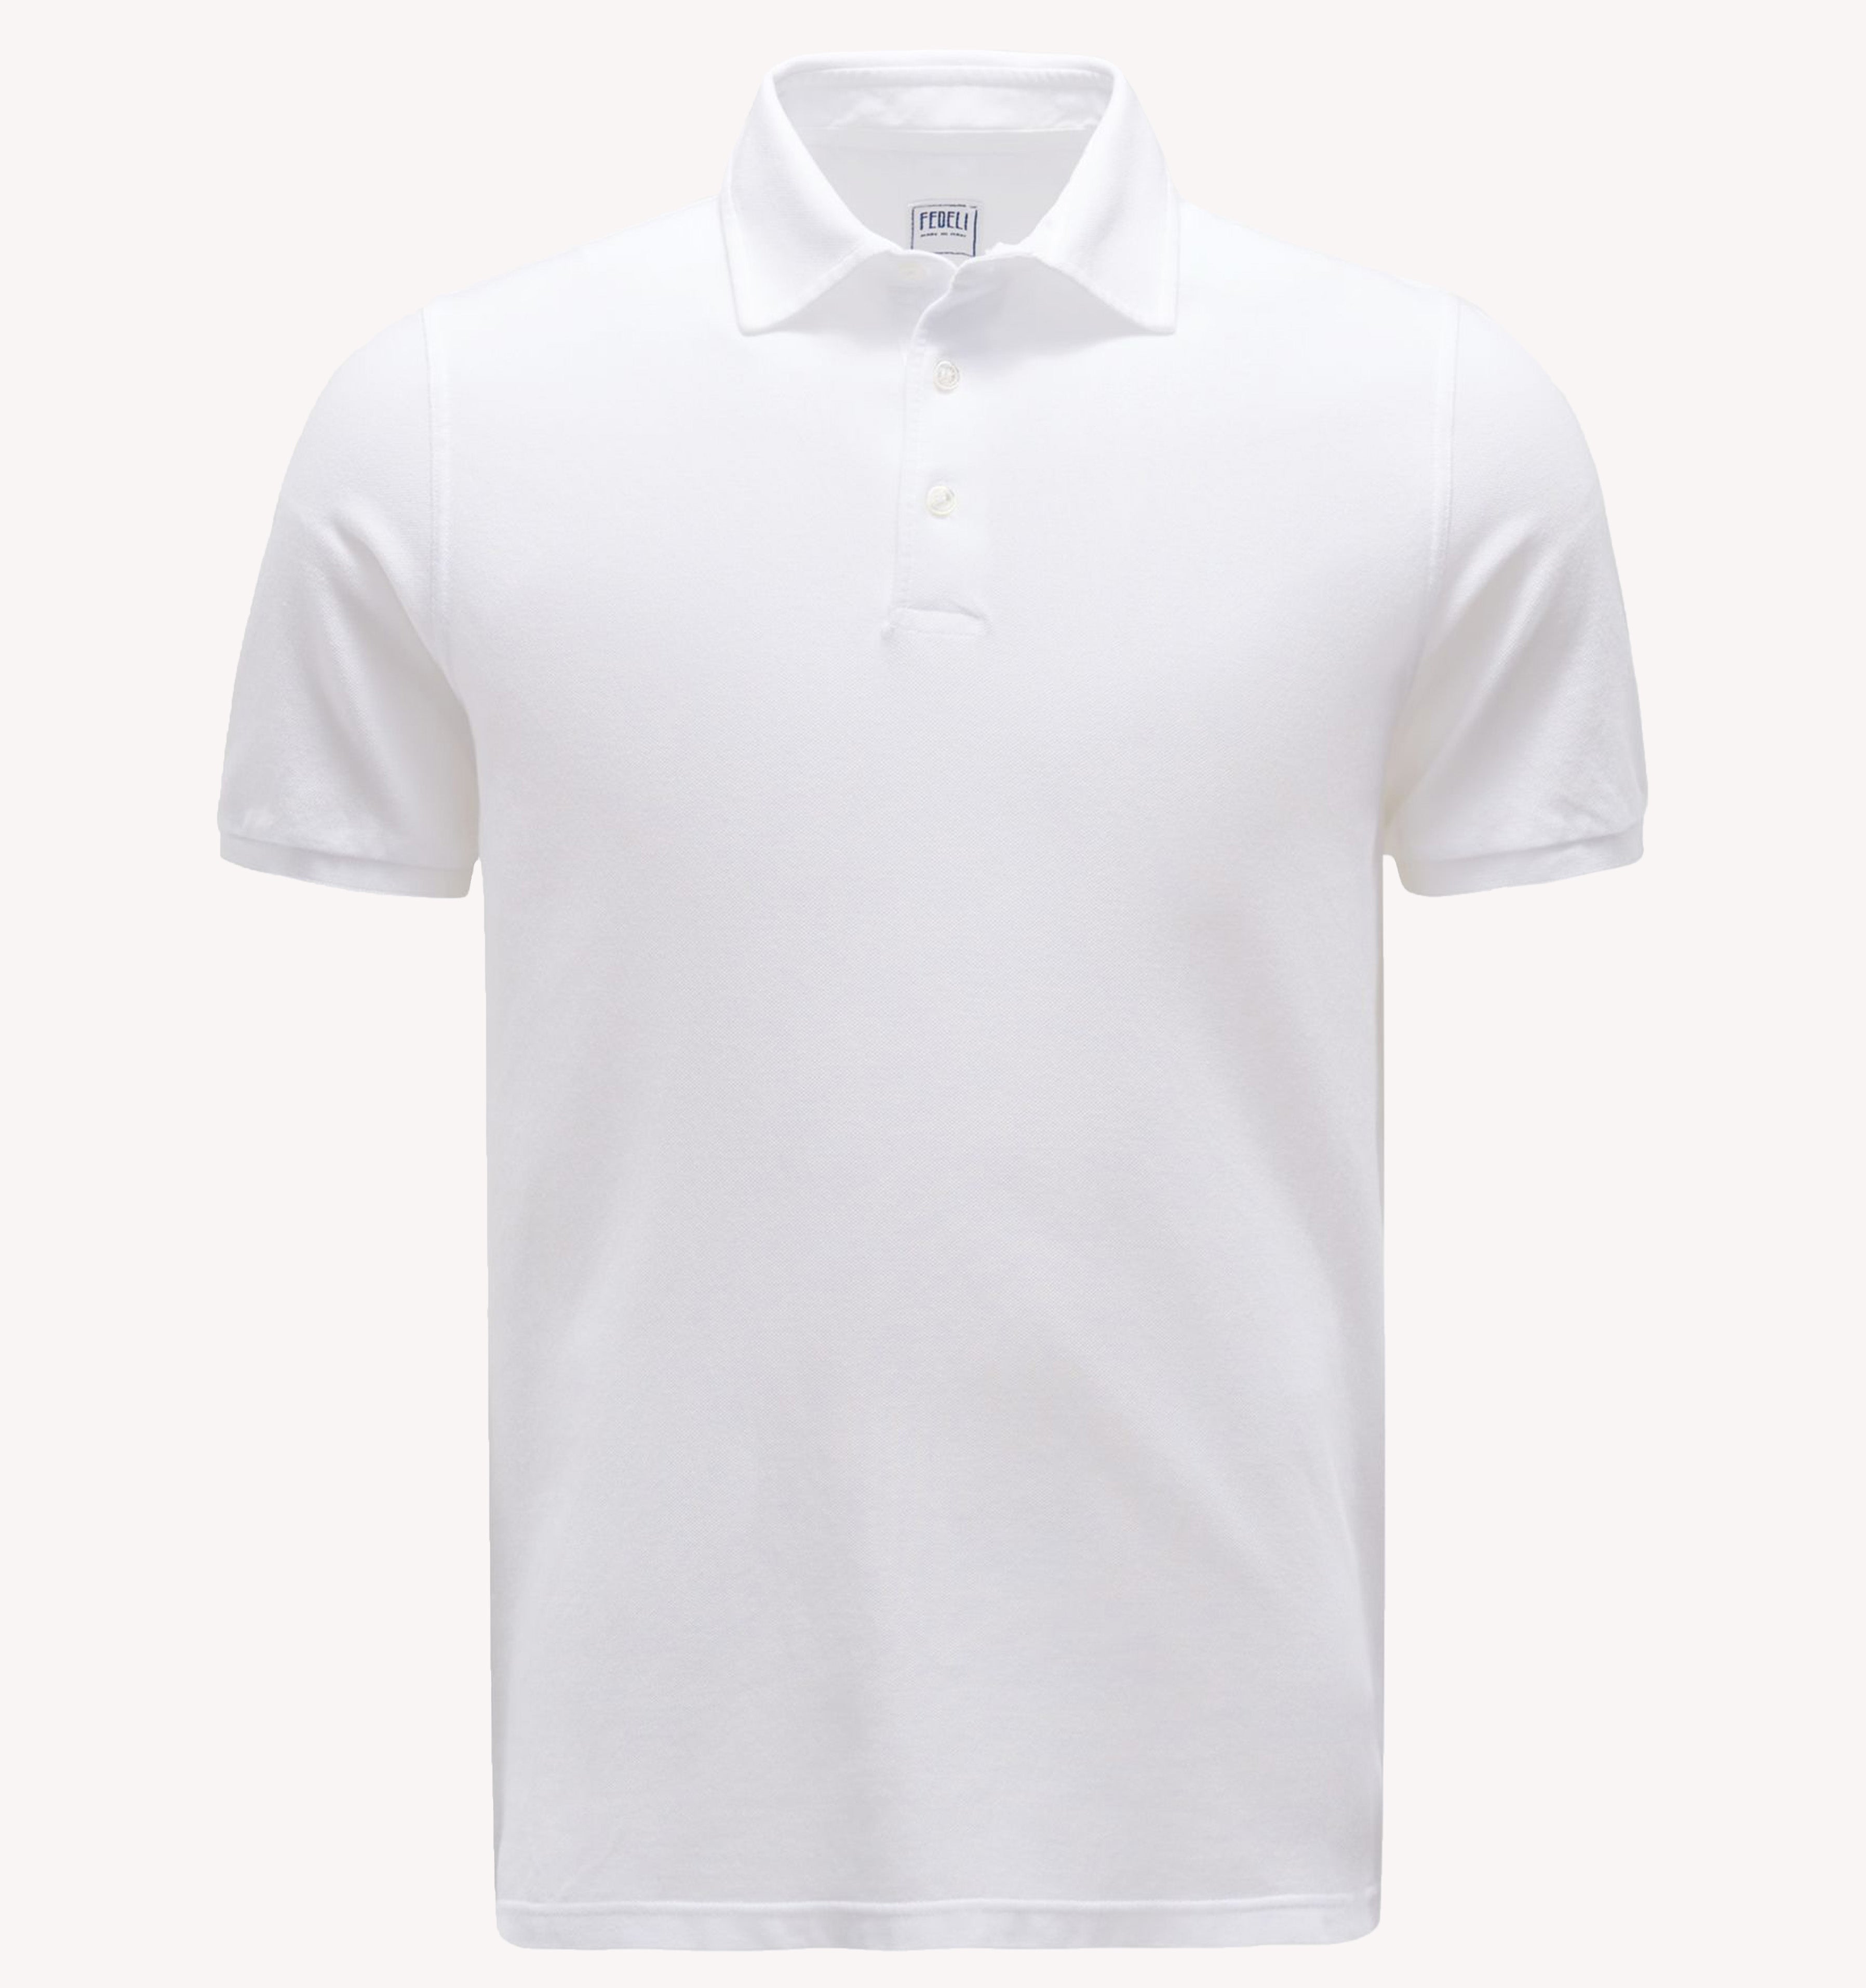 Fedeli North Polo in Frost White - Taylor Richards & Conger